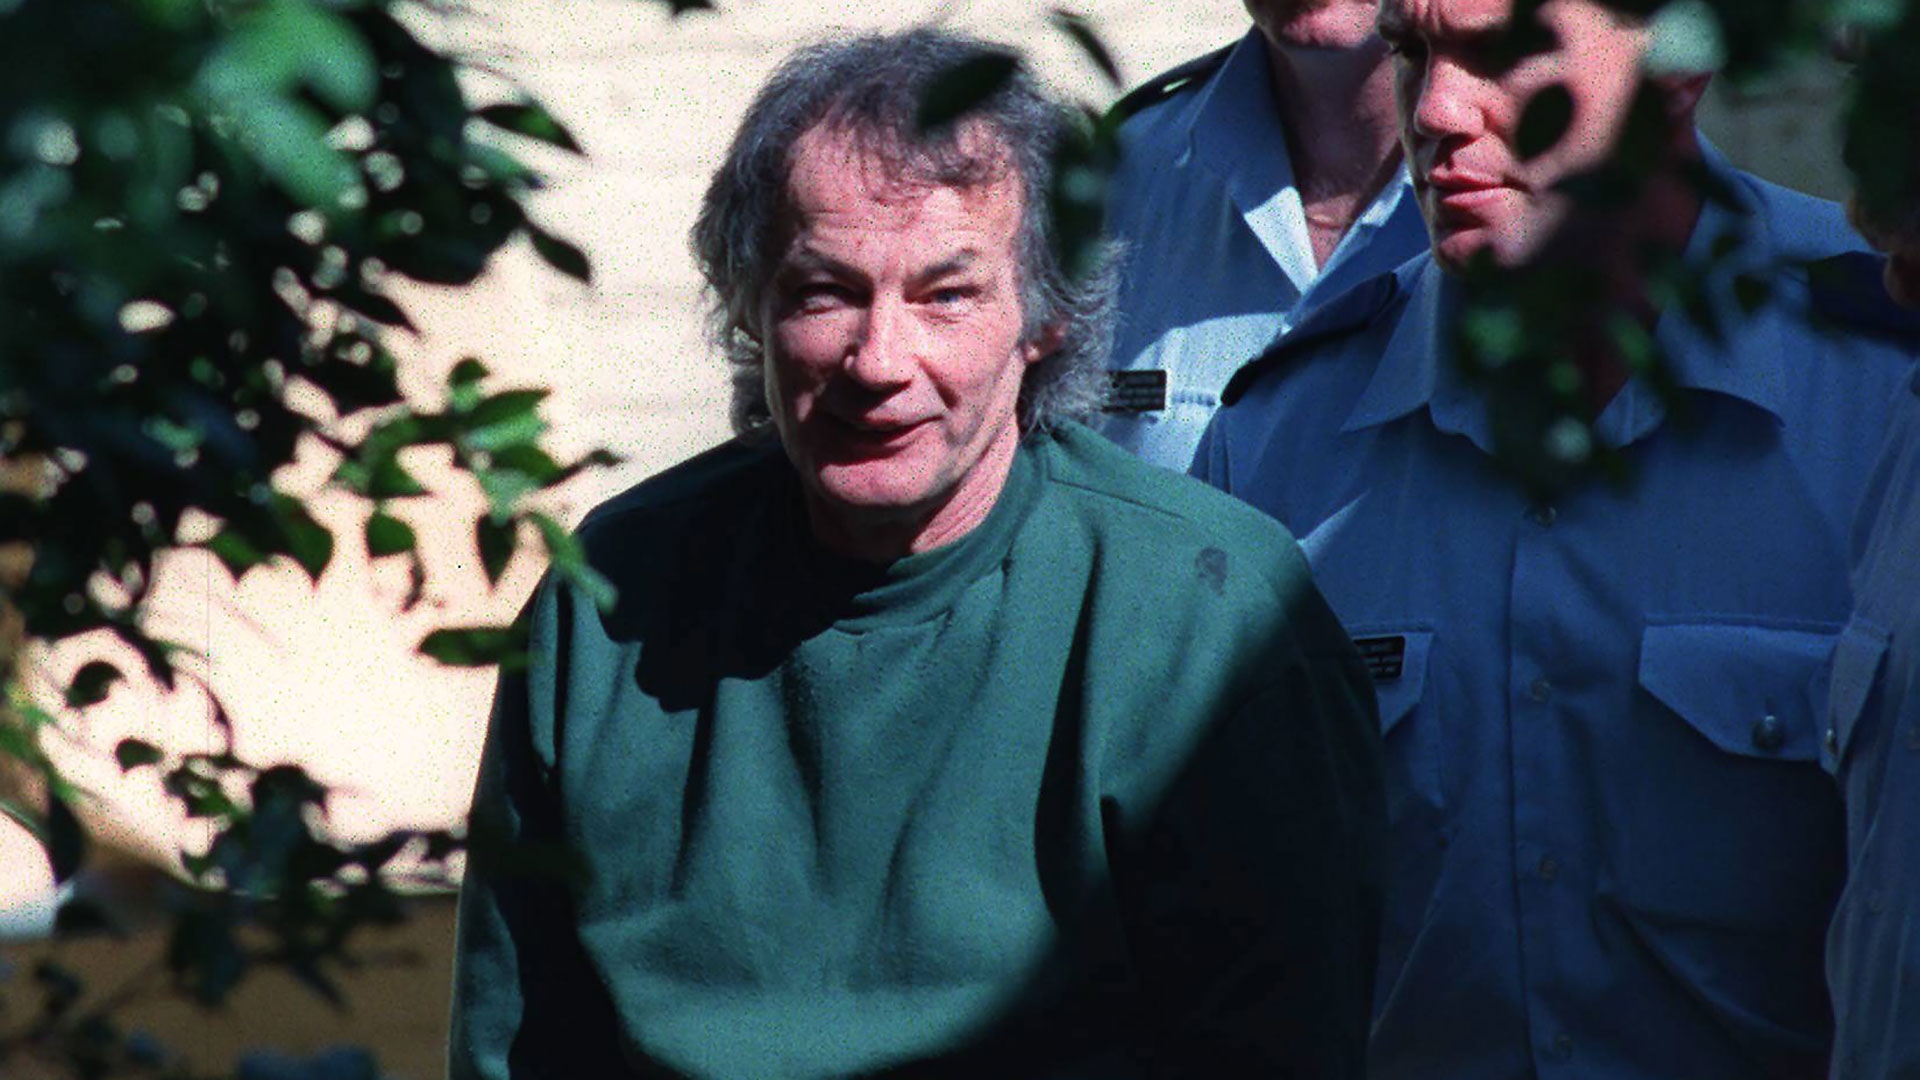 Ivan Milat, the Backpack Murderer, Had a Great-Nephew Who Also Became a Killer